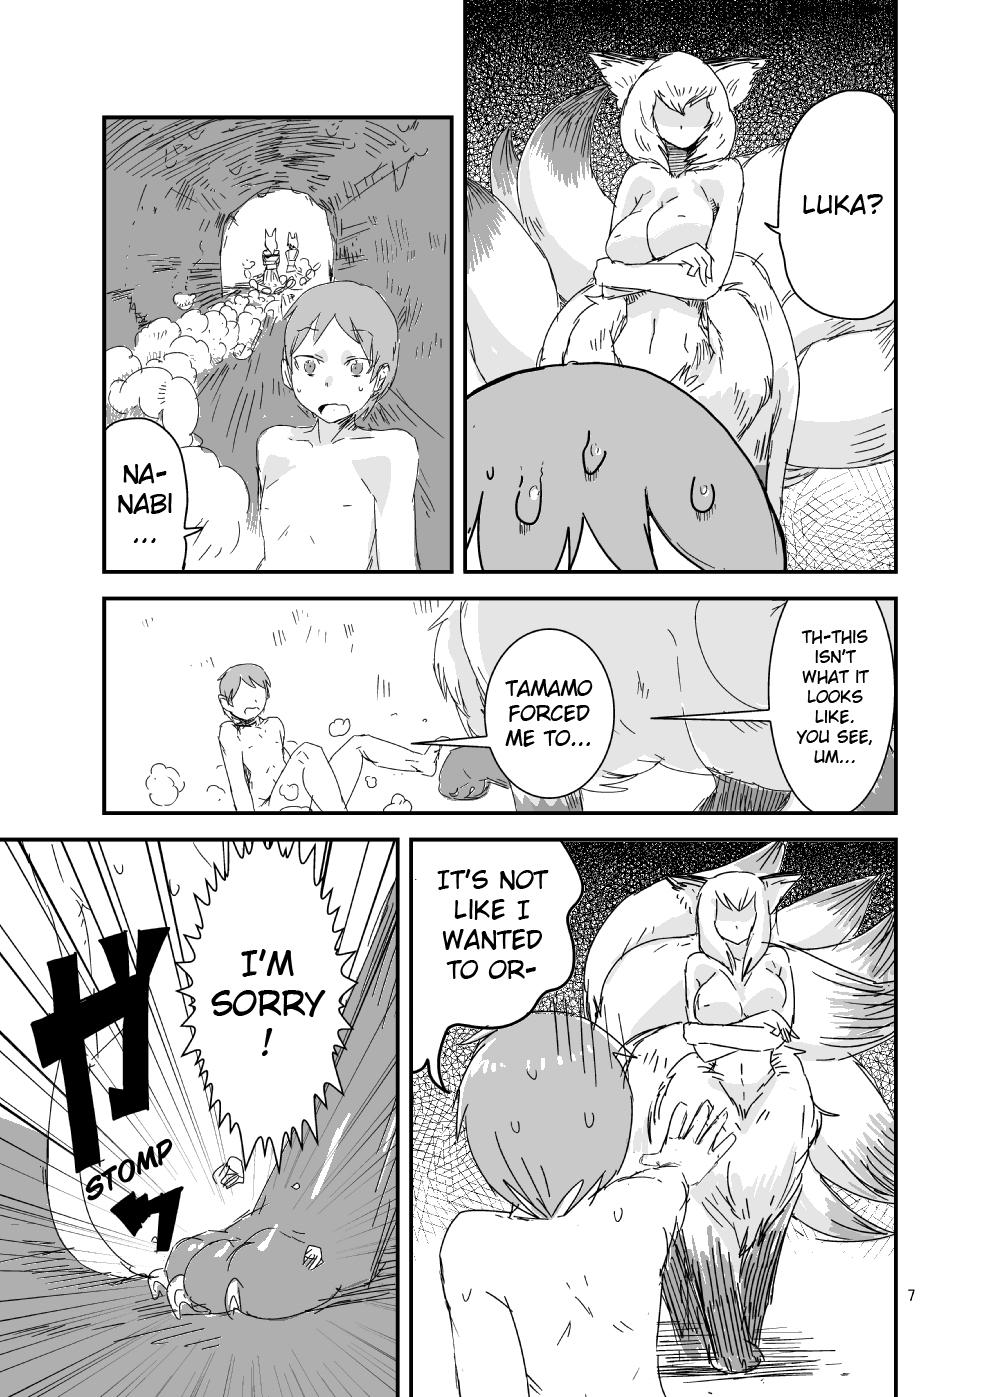 Old Mon Musu Quest! Beyond The End - Monster girl quest Big Penis - Page 6